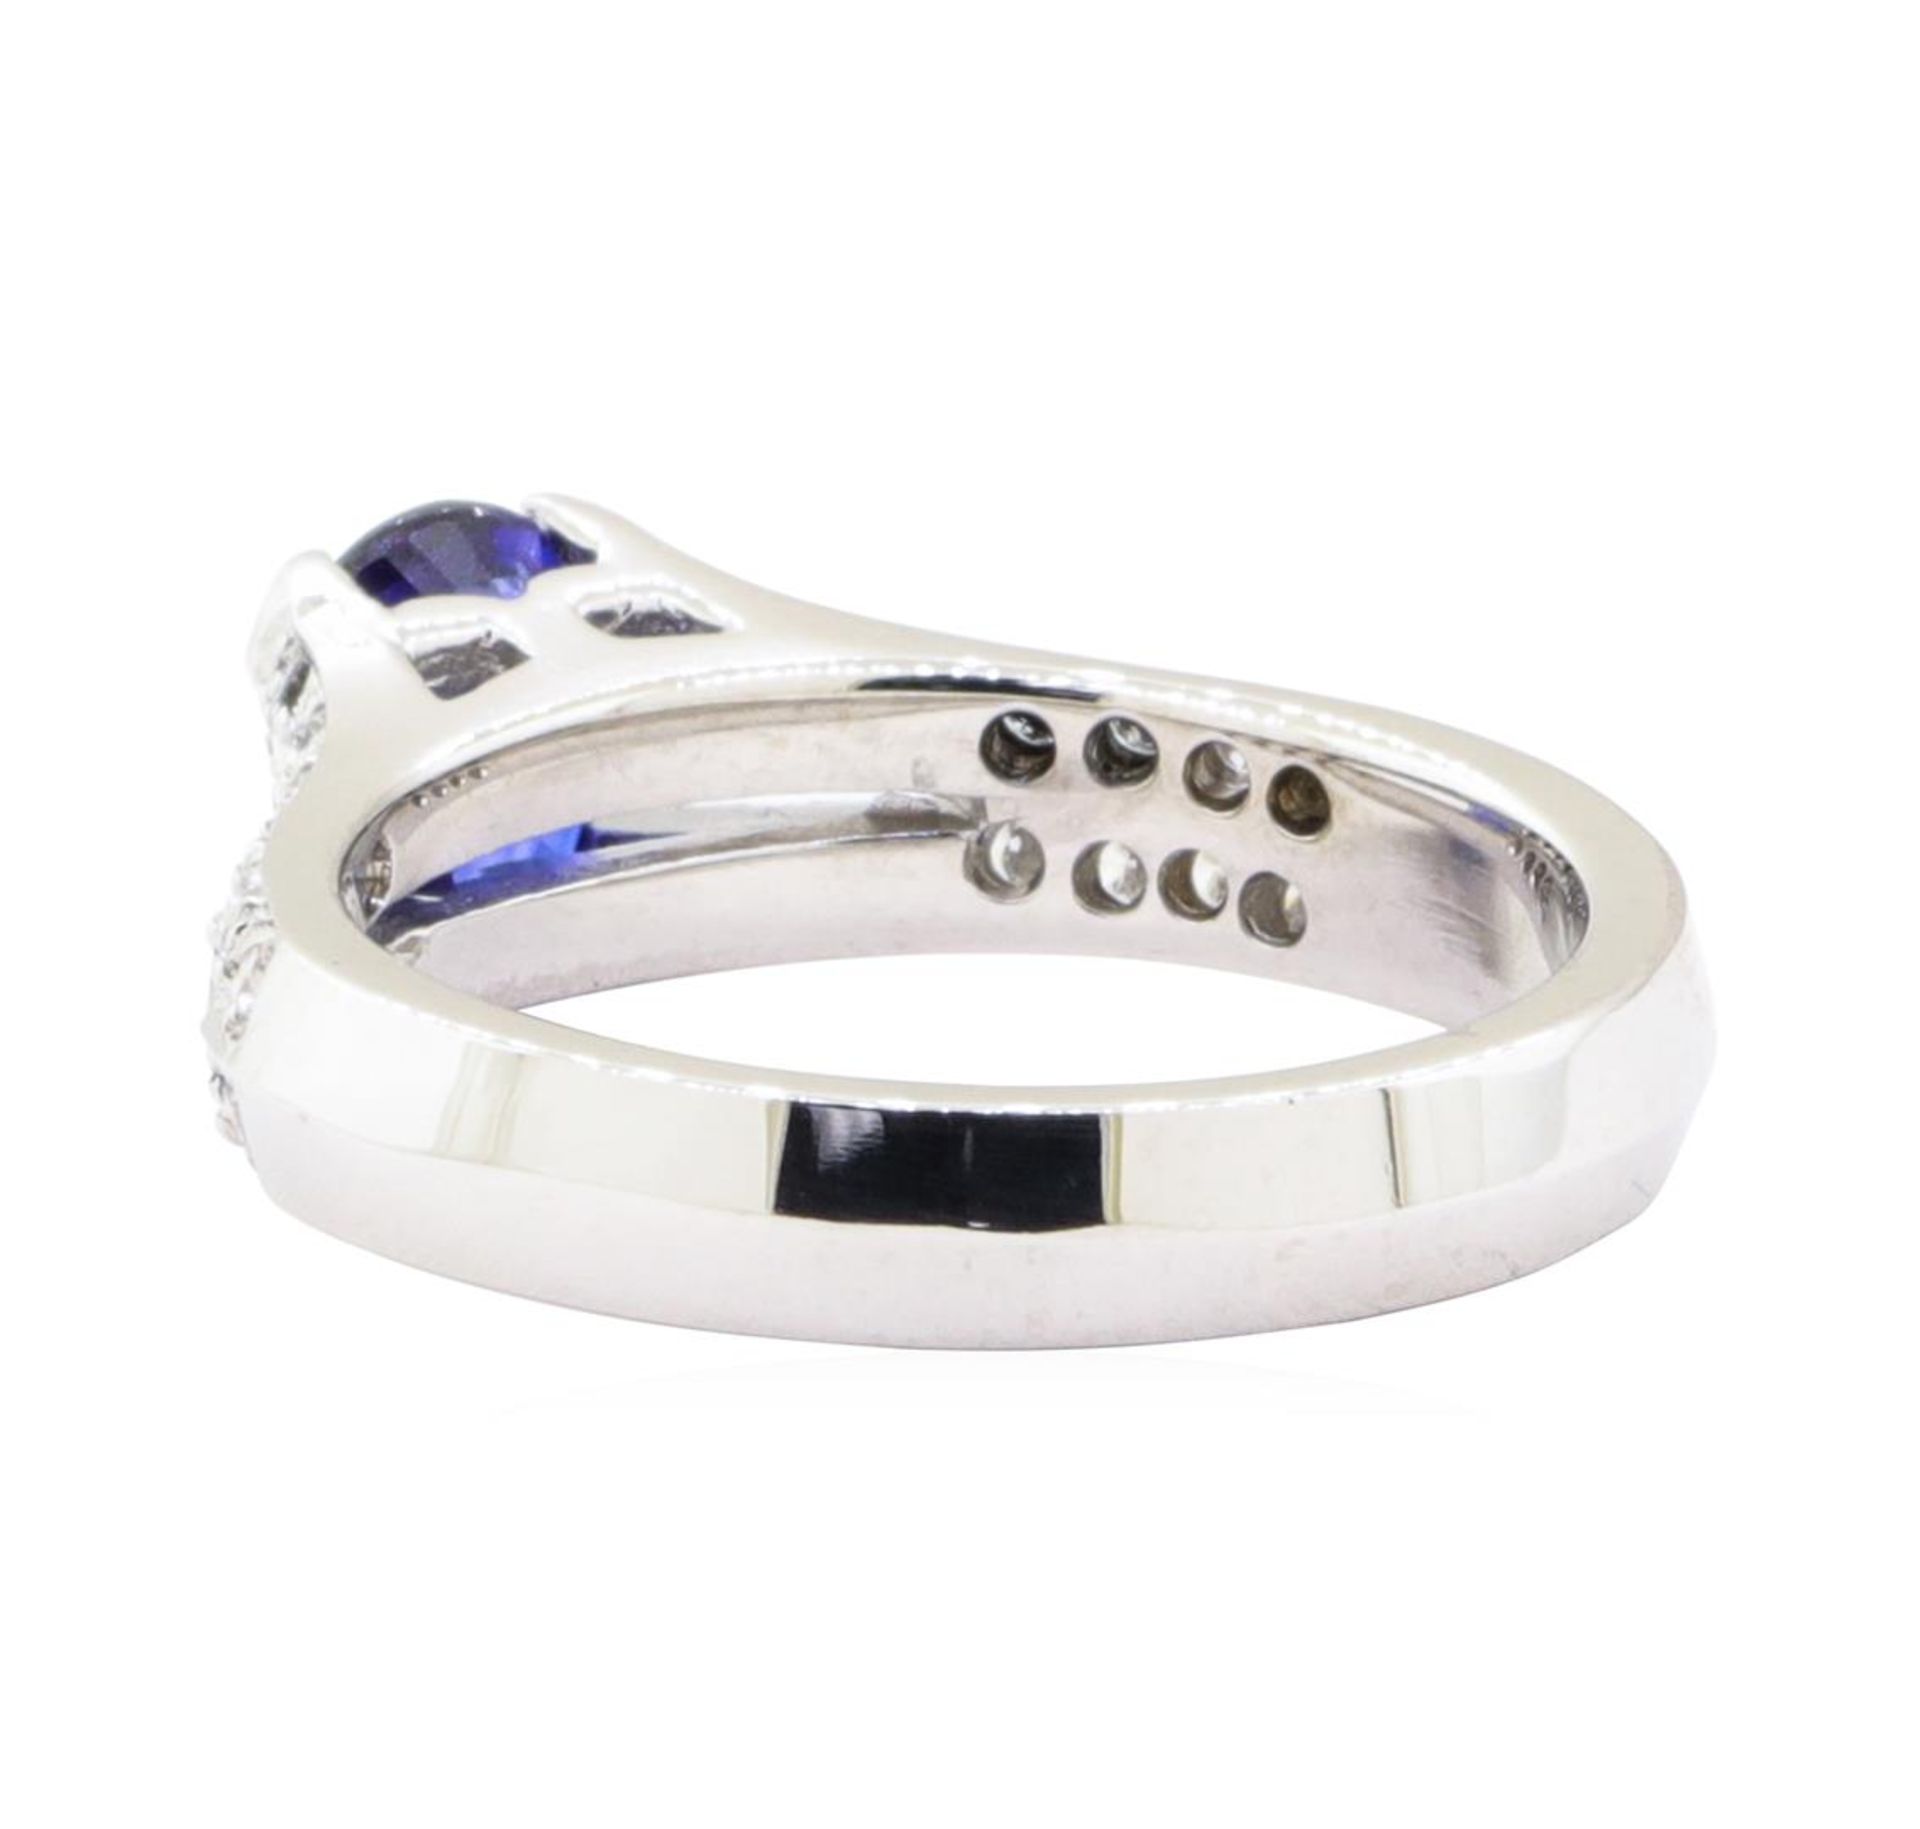 1.28 ctw Sapphire And Diamond Ring - 18KT White Gold - Image 3 of 5